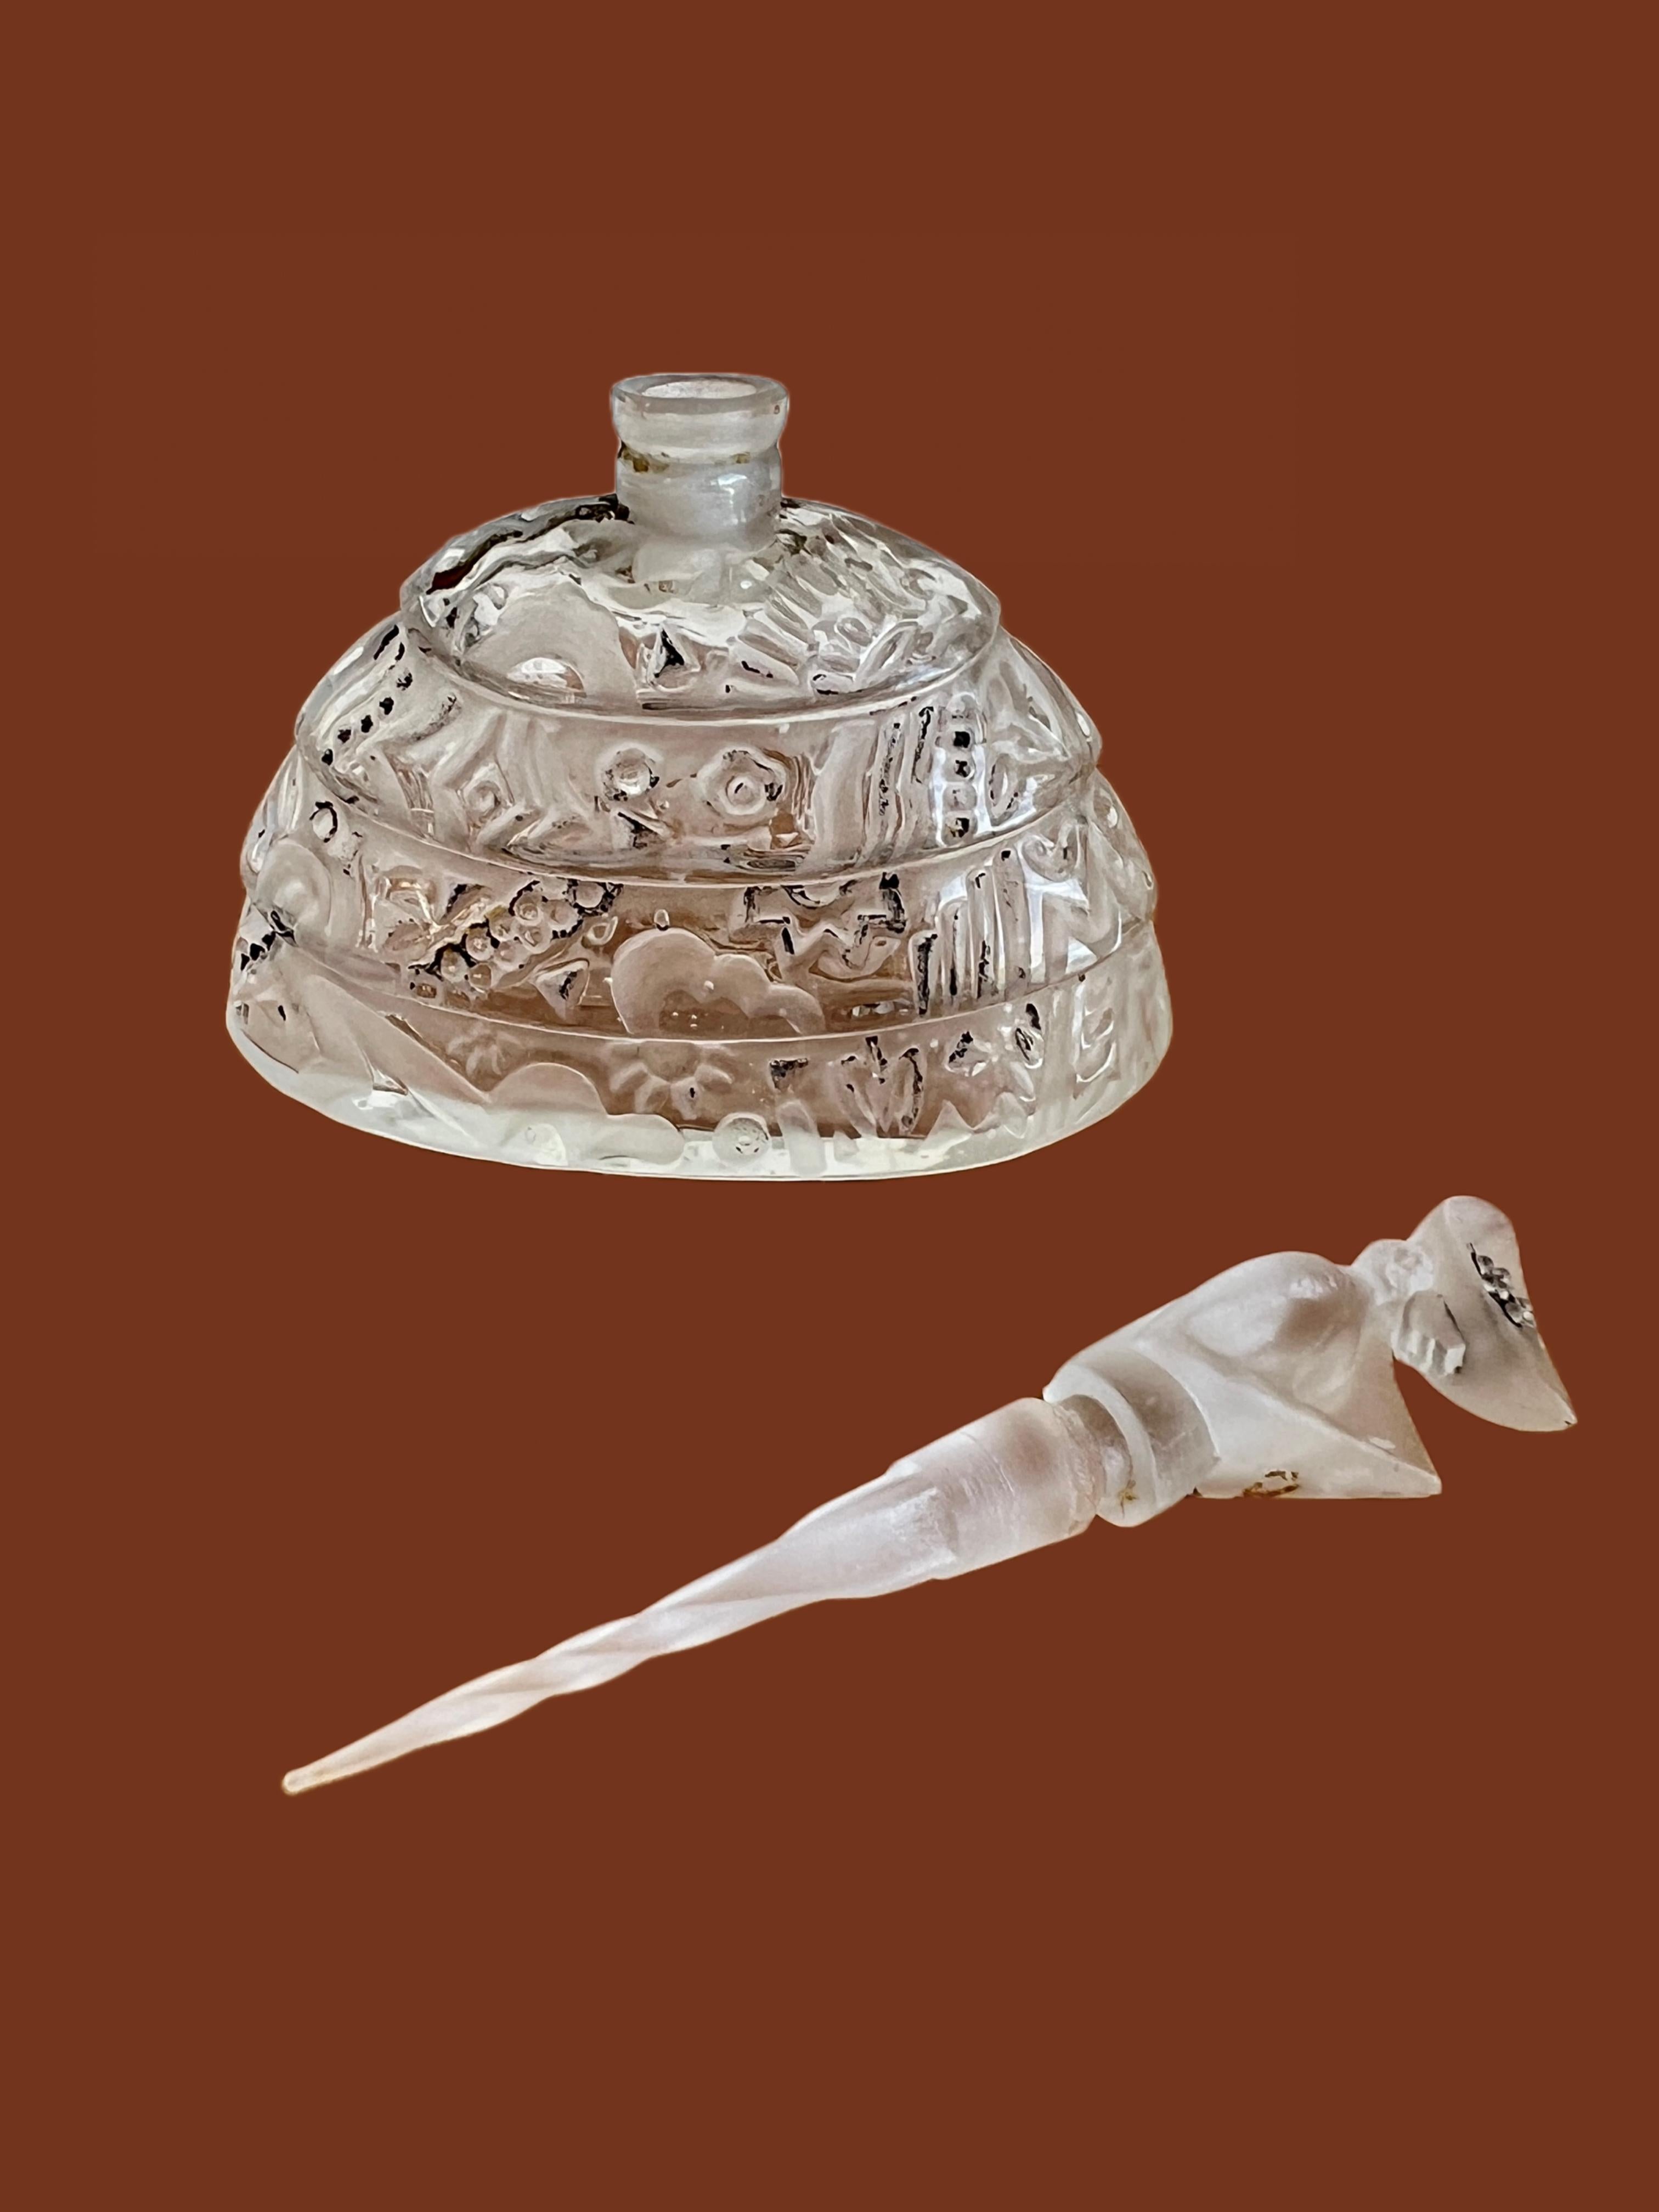 Incredible and rare figural perfume bottle designed by Albert Mosheim for the House of Tre-jur. It once held the perfume “Suivez - Moi” (Follow Me).

Size: 3-1/4